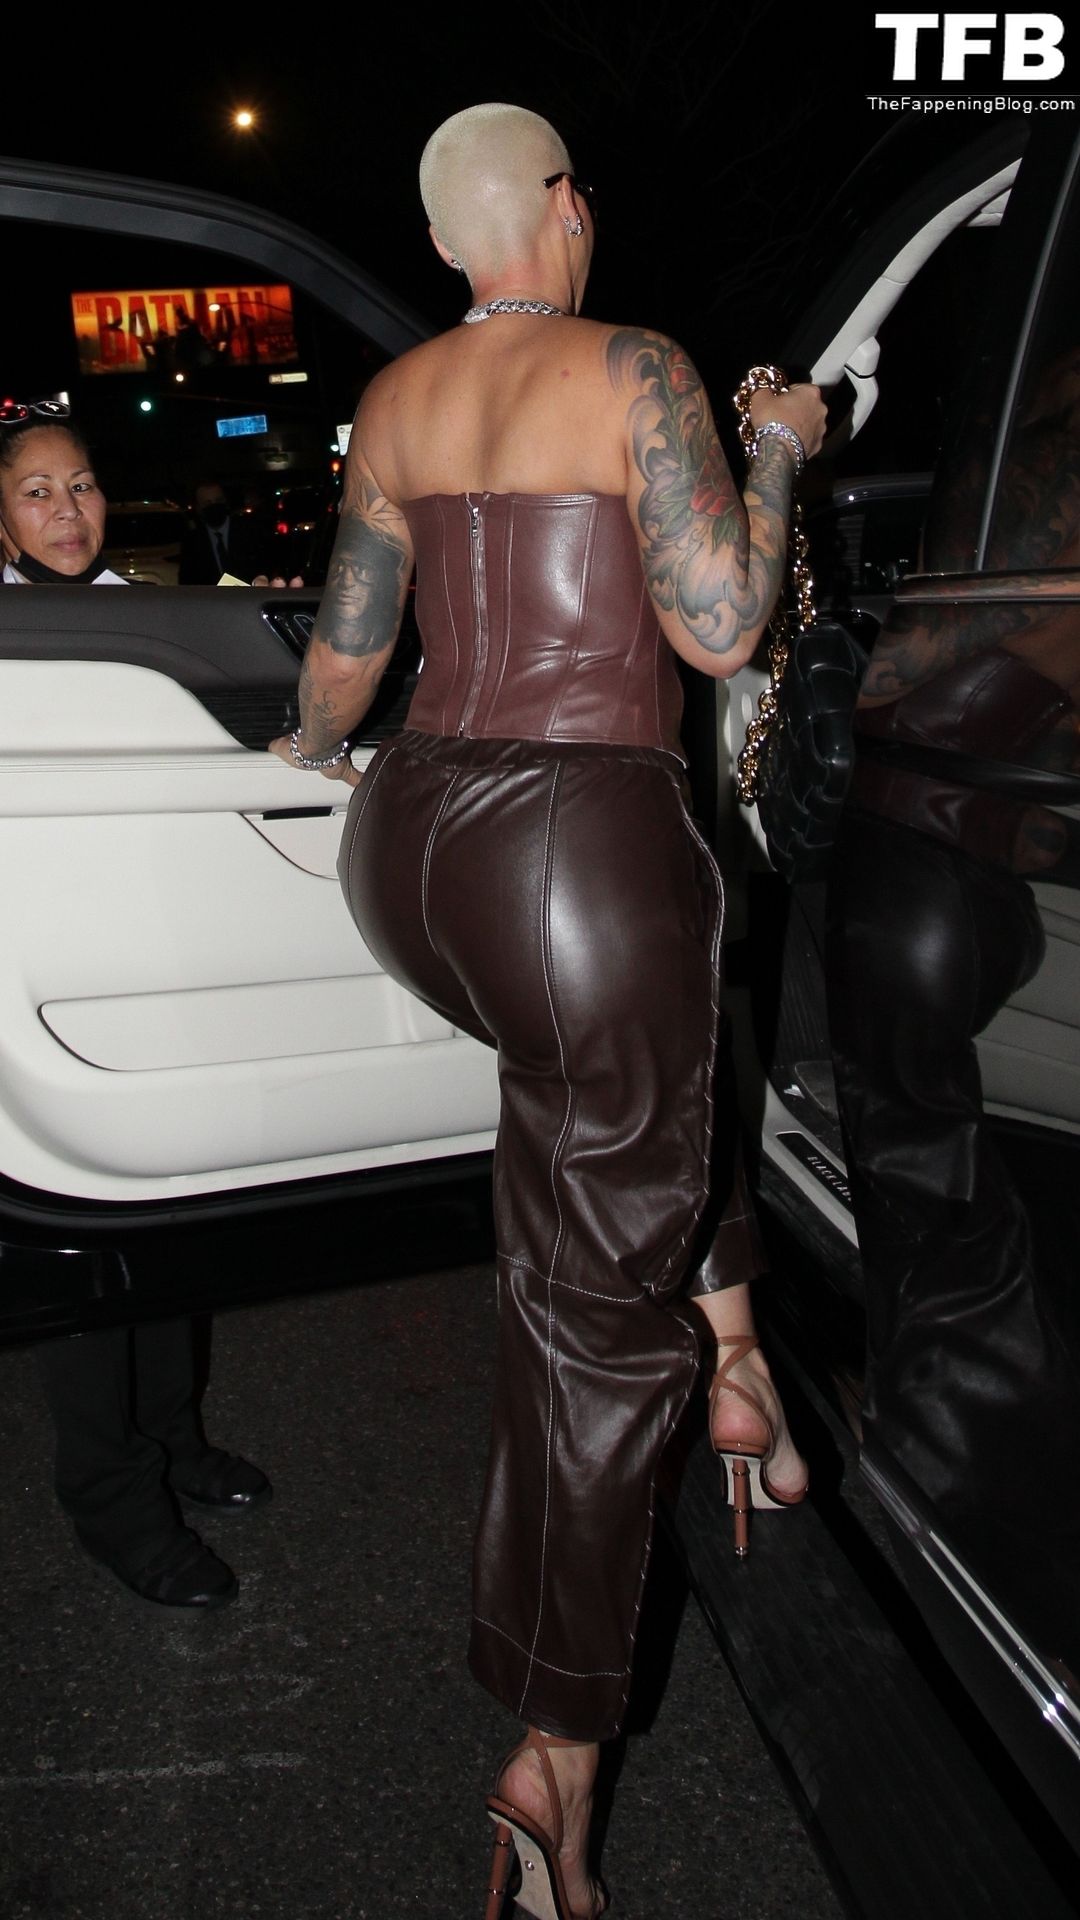 Amber-Rose-Sexy-The-Fappening-Blog-18.jpg